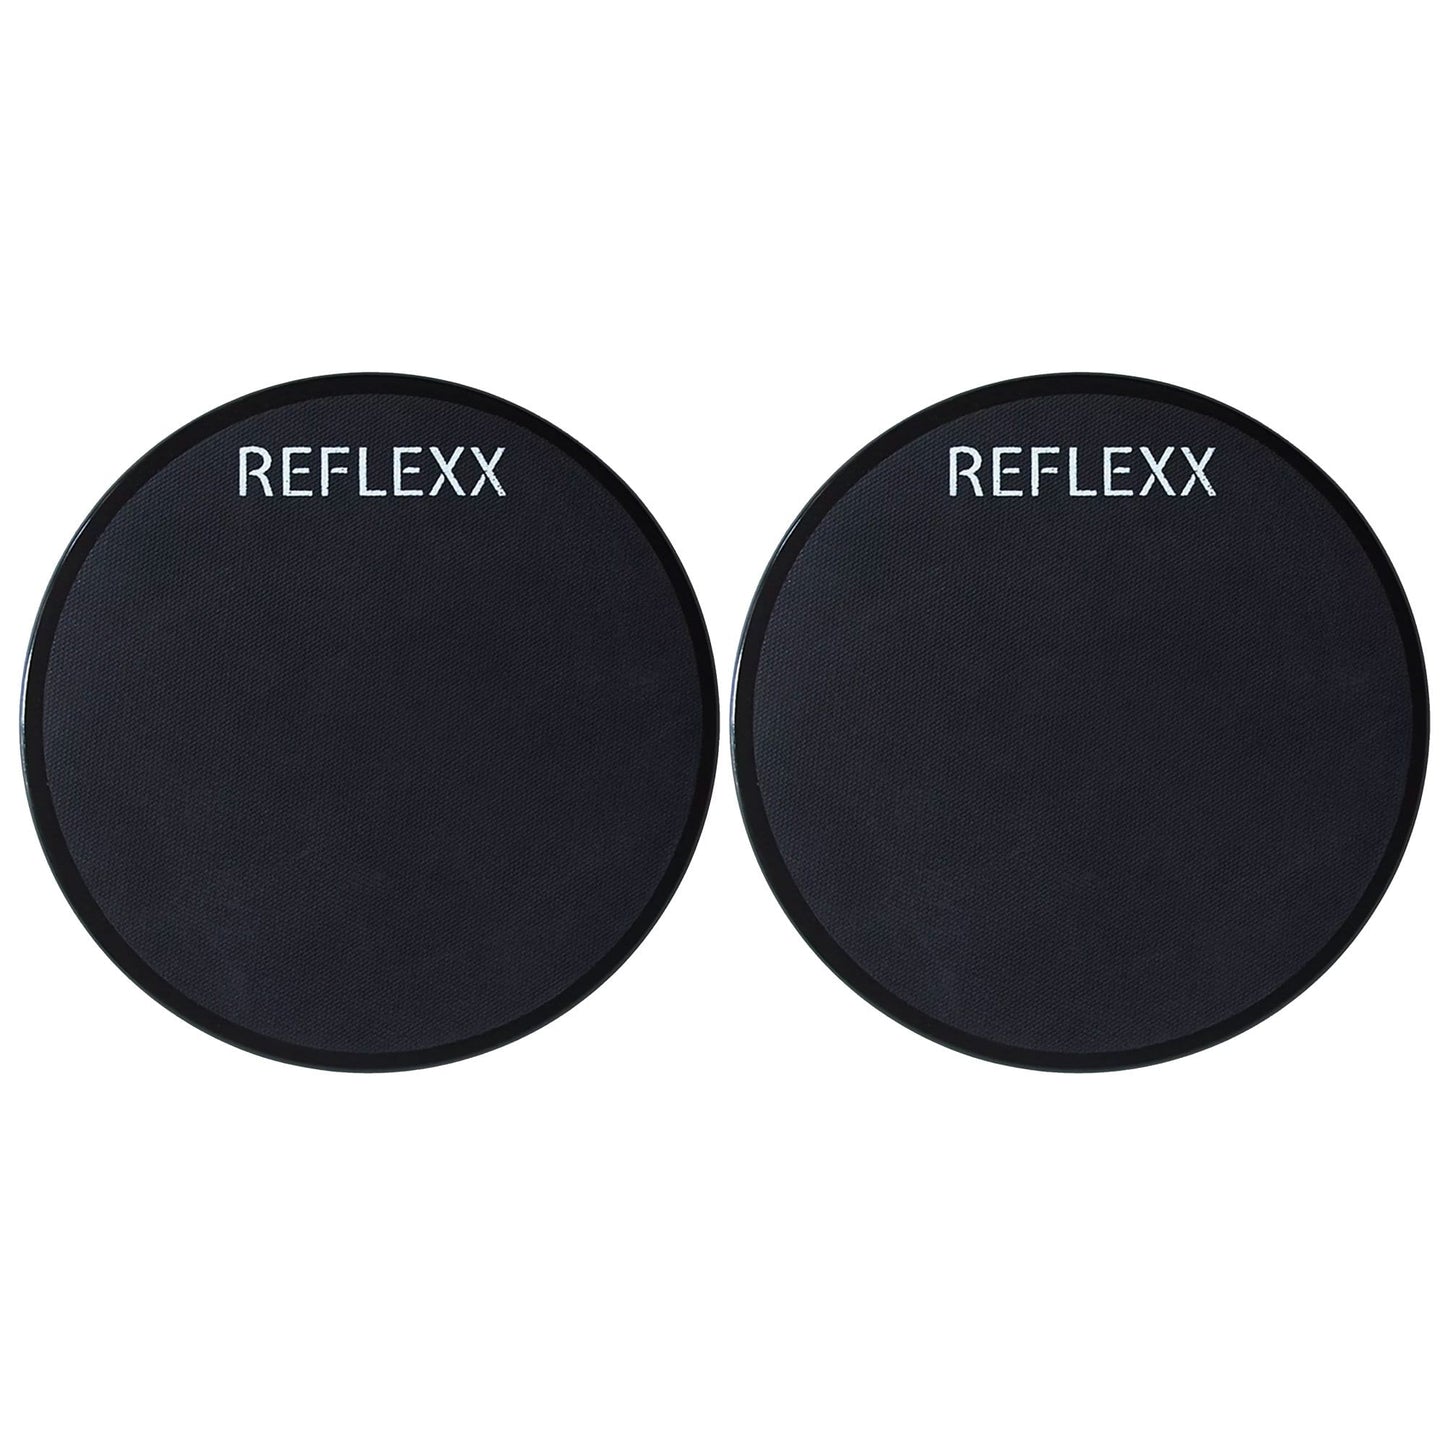 Reflexx Conditioning Pad 10" Black 2 Pack Bundle Drums and Percussion / Practice Pads